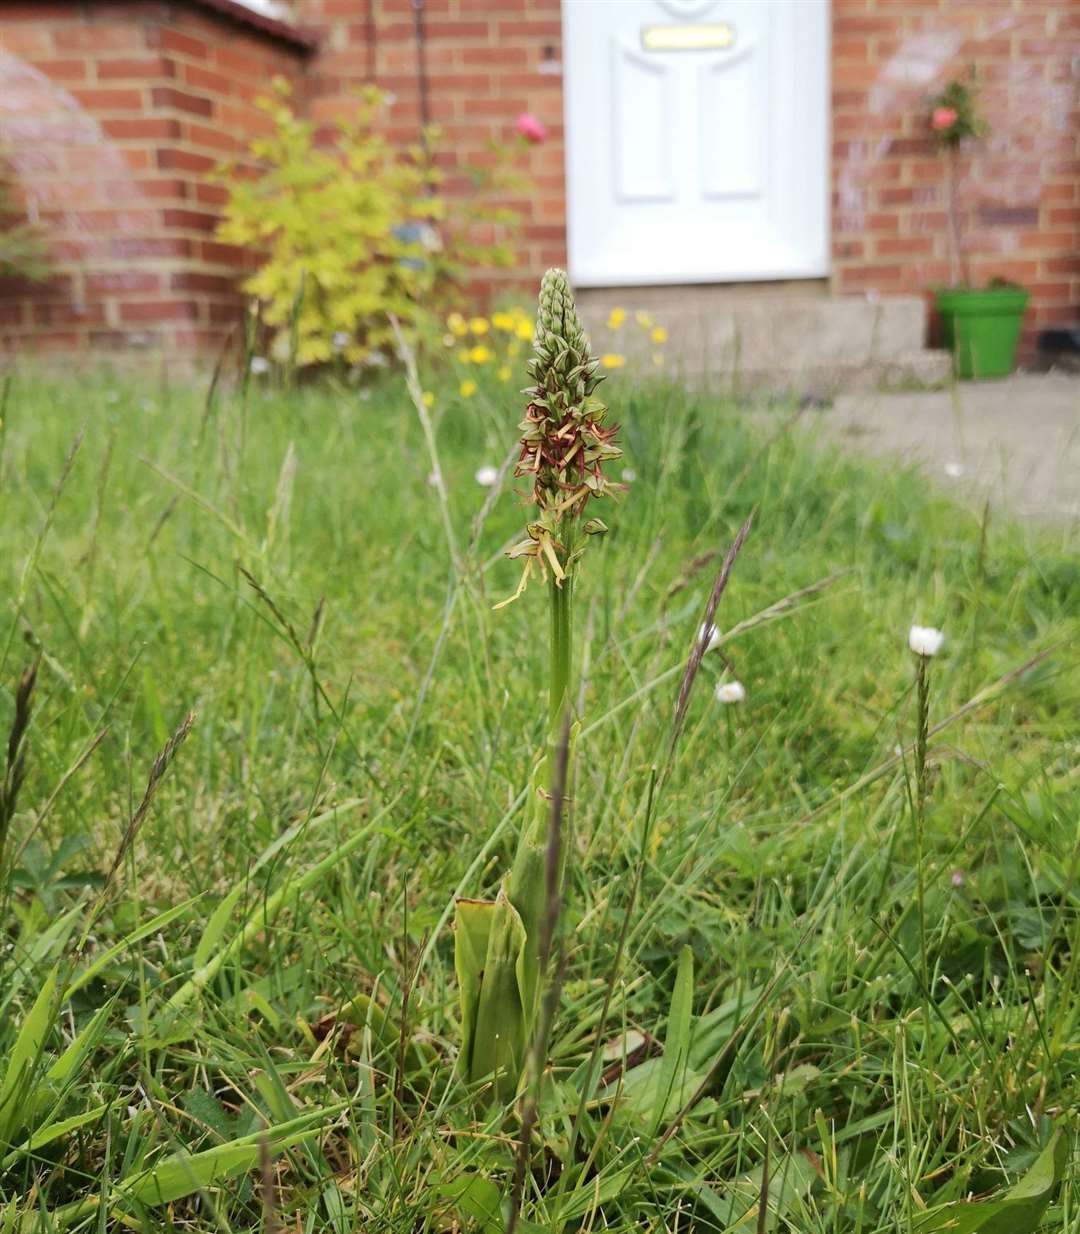 A rare orchid, believed to be the Man Orchid, was found in the front garden of a home in Chatham. Photo: Angelika Djacenko